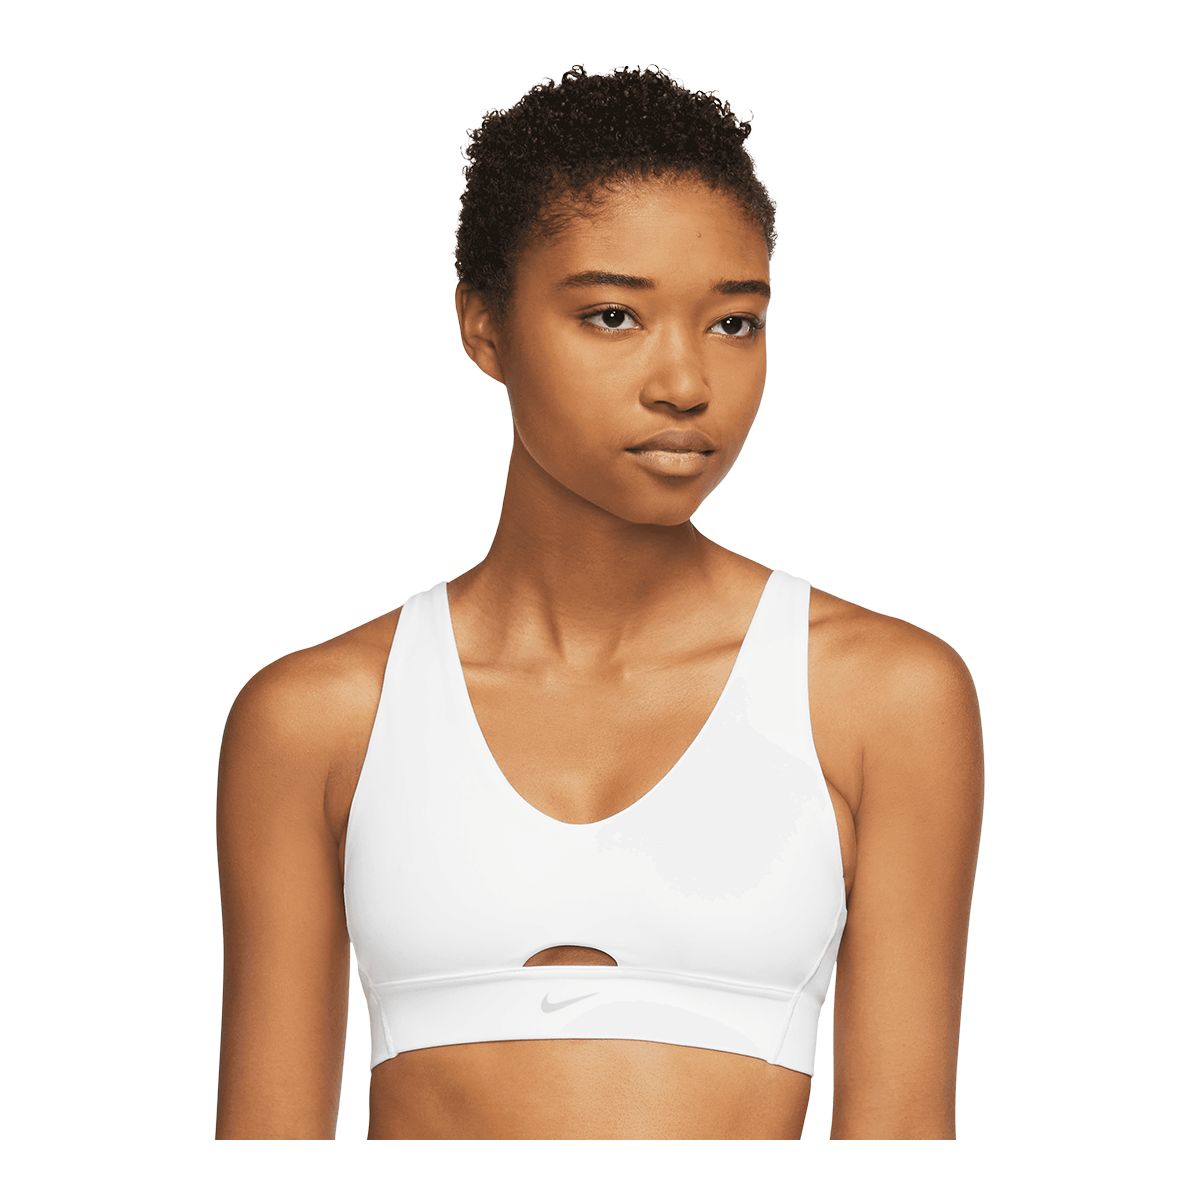 Neck Sports Bra - Nike Dri - nike dunk high for youth girls shoes sale  women - Fit Indy Women's Light - Cheap Lefresnoy Jordan outlet - Support  Padded U